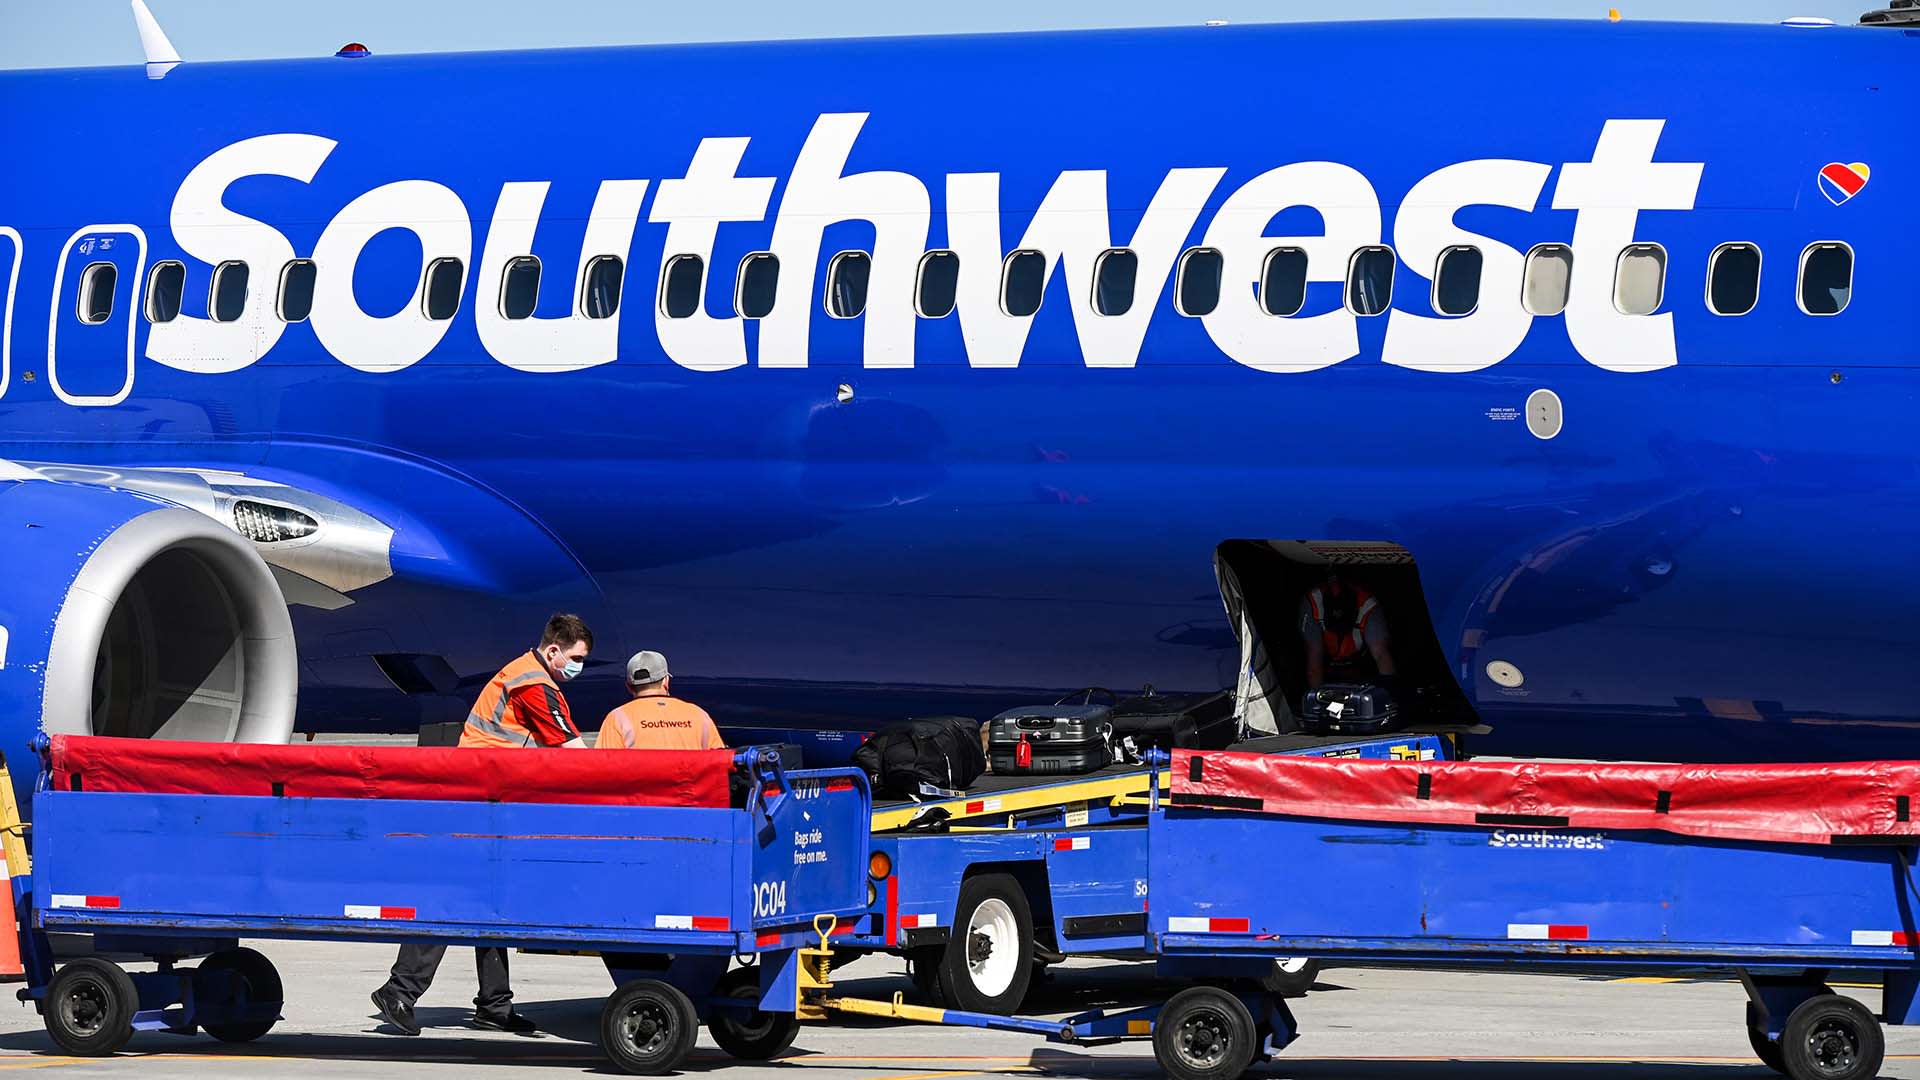 Southwest Airlines Just Made a Controversial Change. Its Flight Attendants Are 'Outraged'